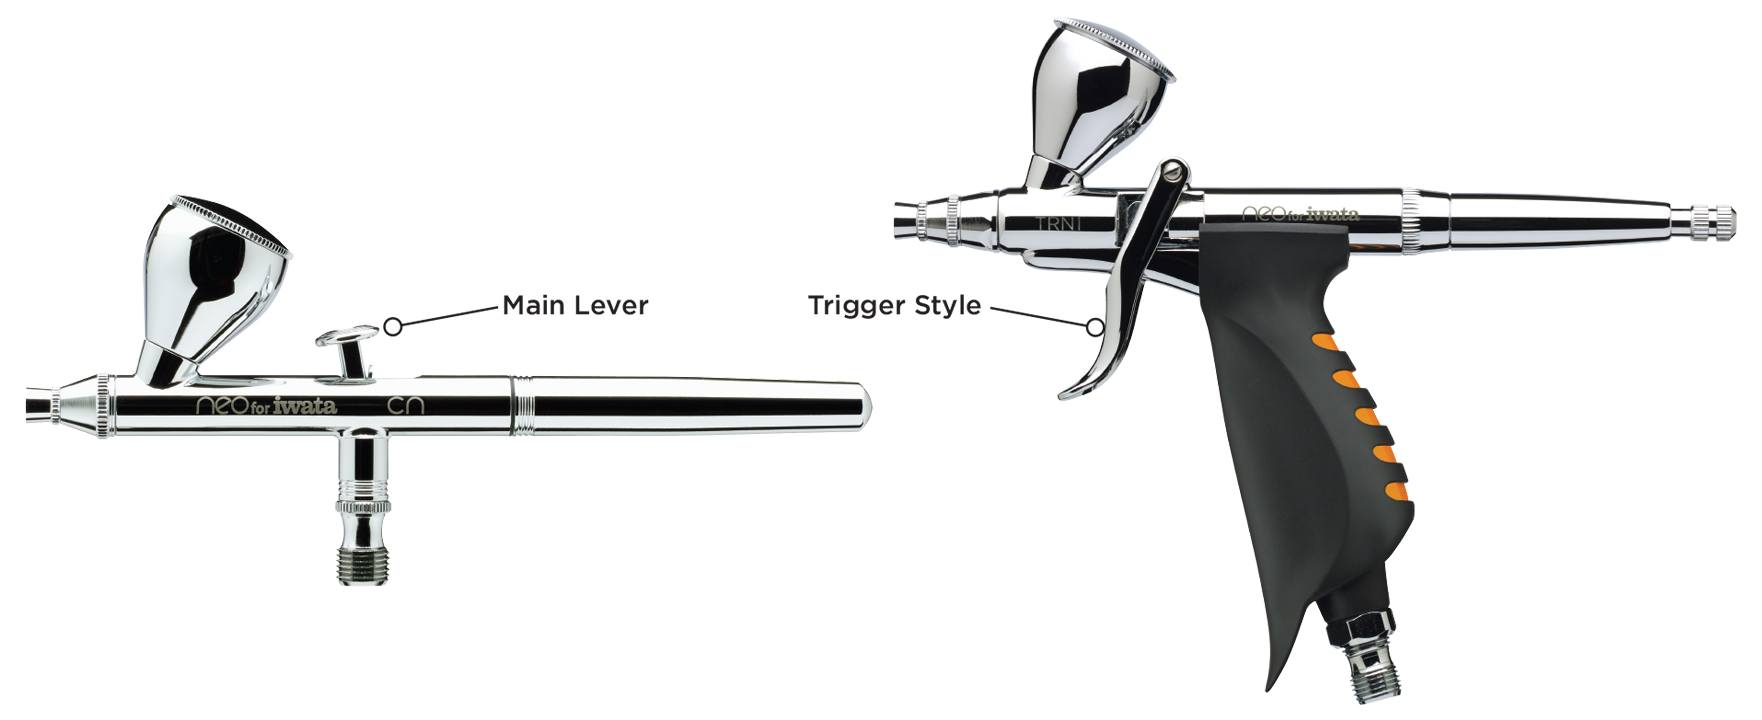 Two Iwata airbrushes showing the difference between Trigger and main lever models